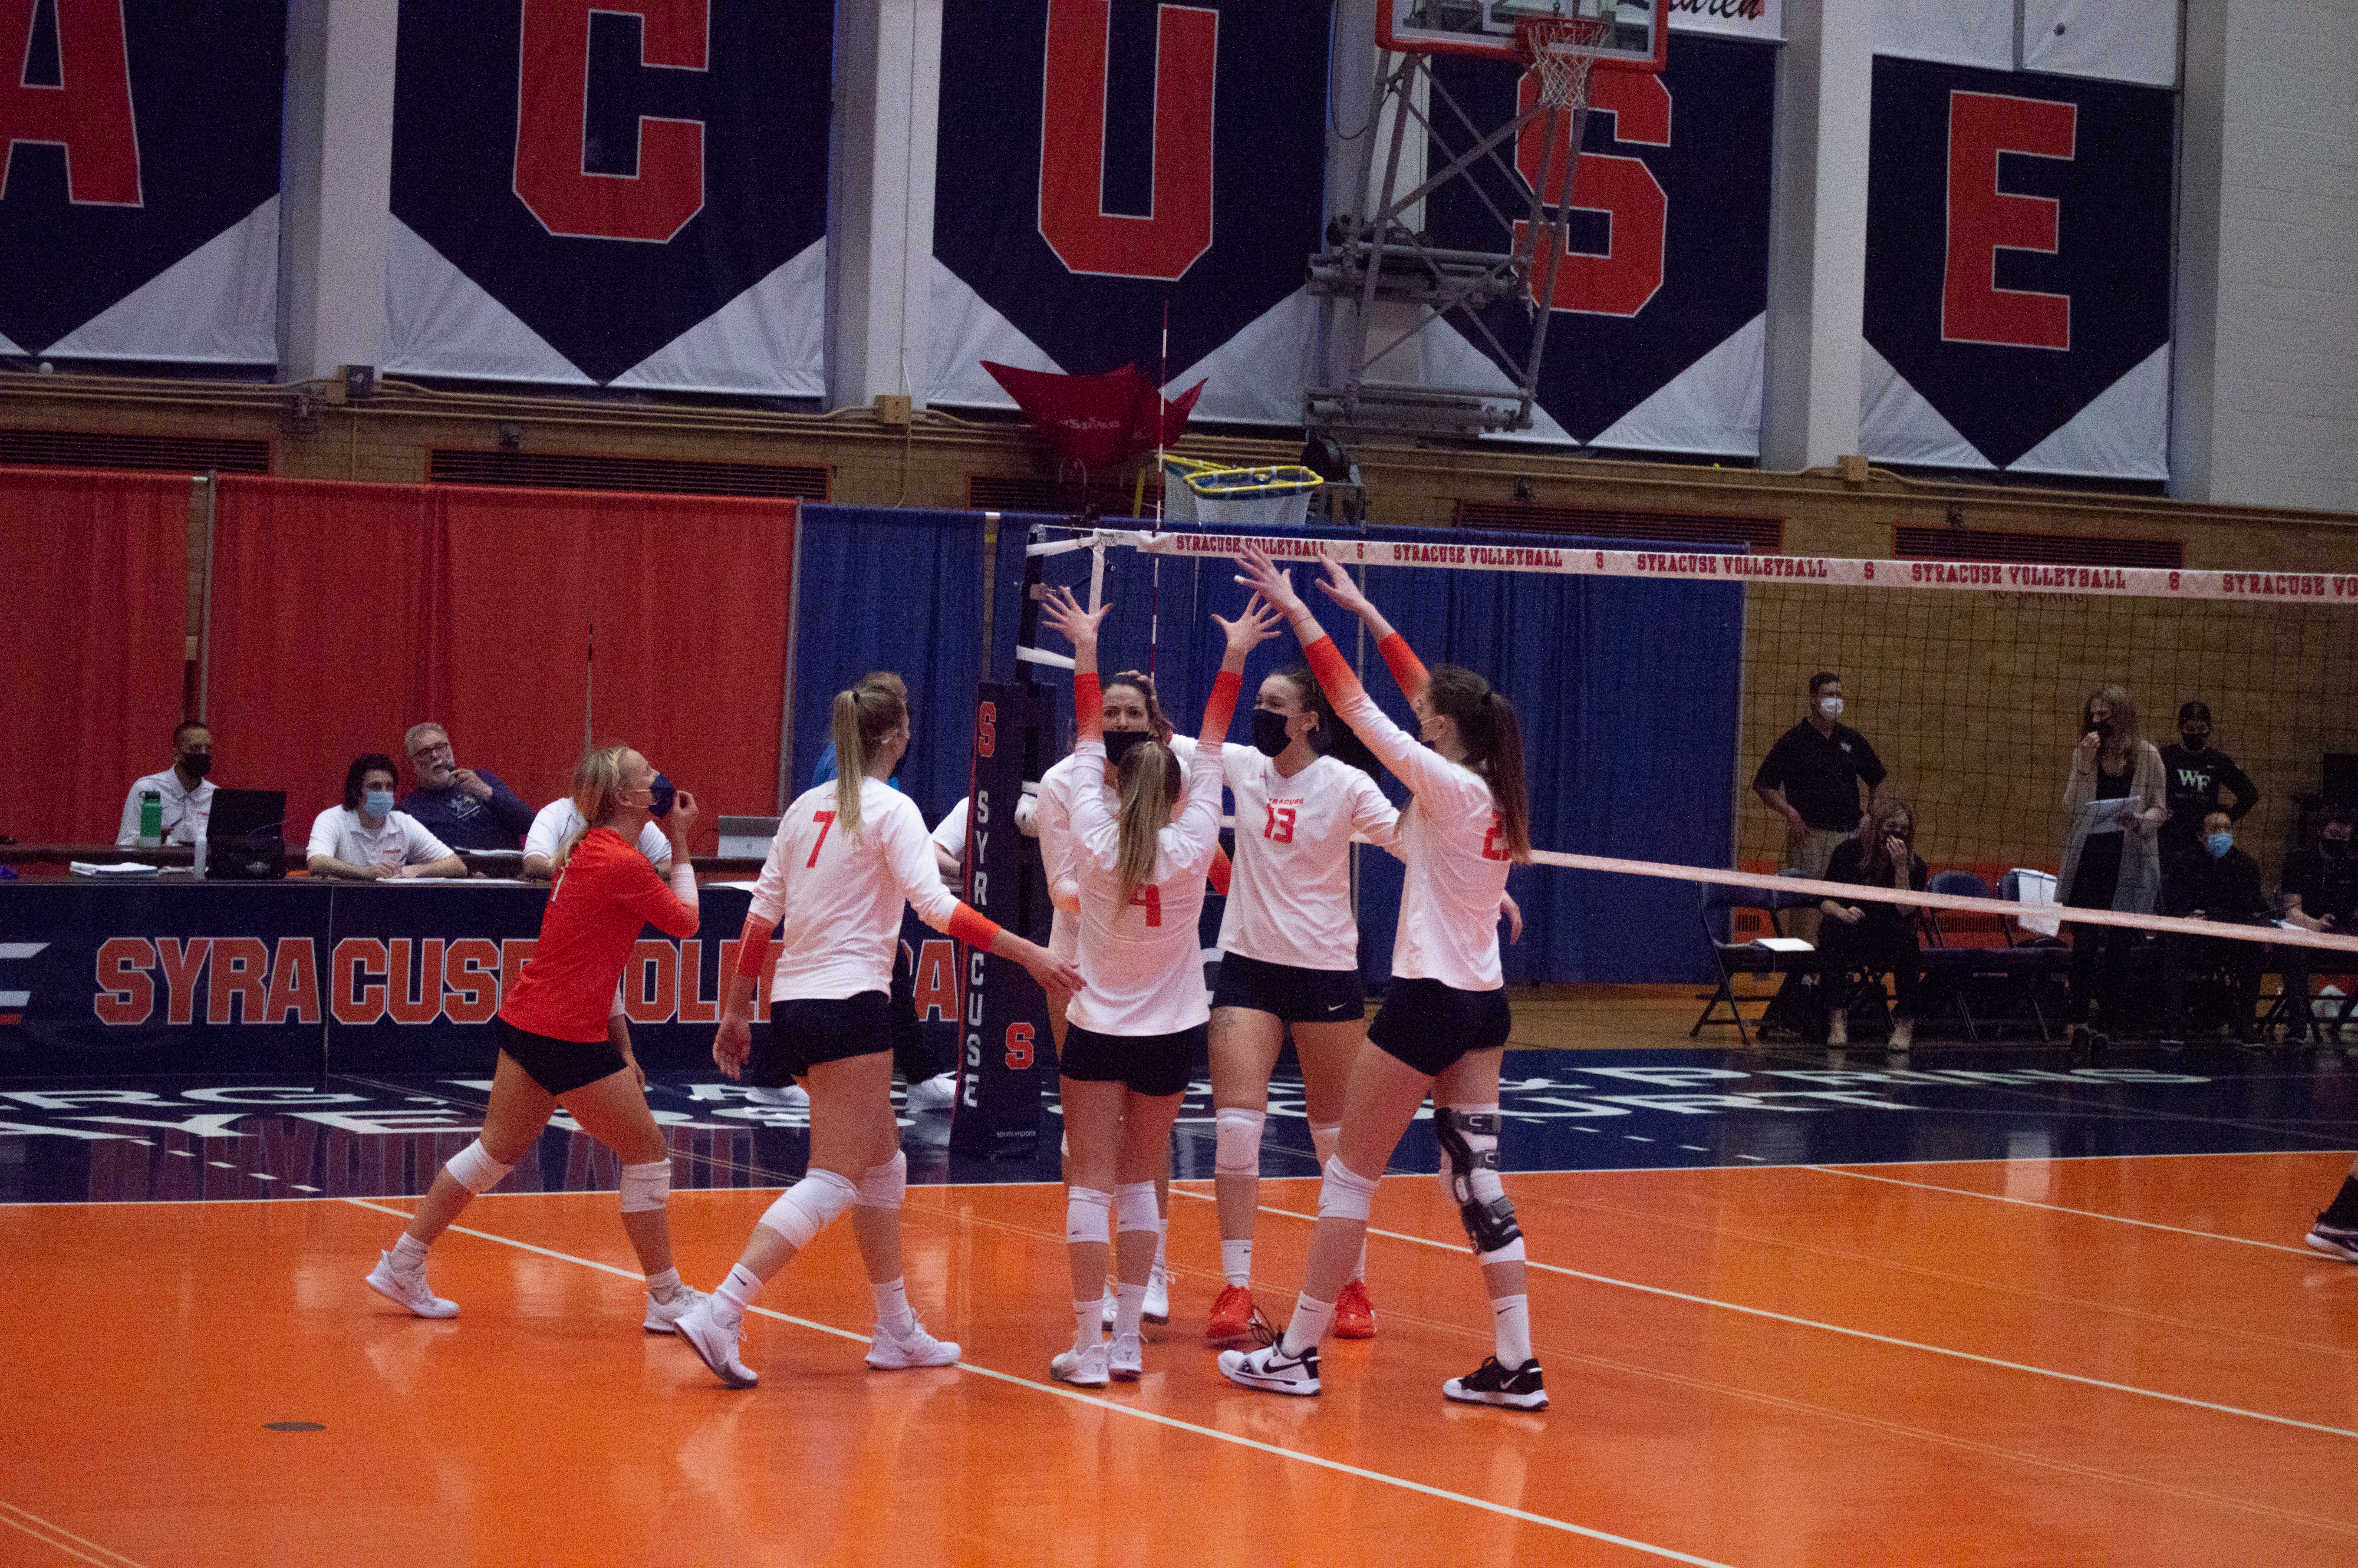 Syracuse Volleyball wins 3-0 against Wake Forest.